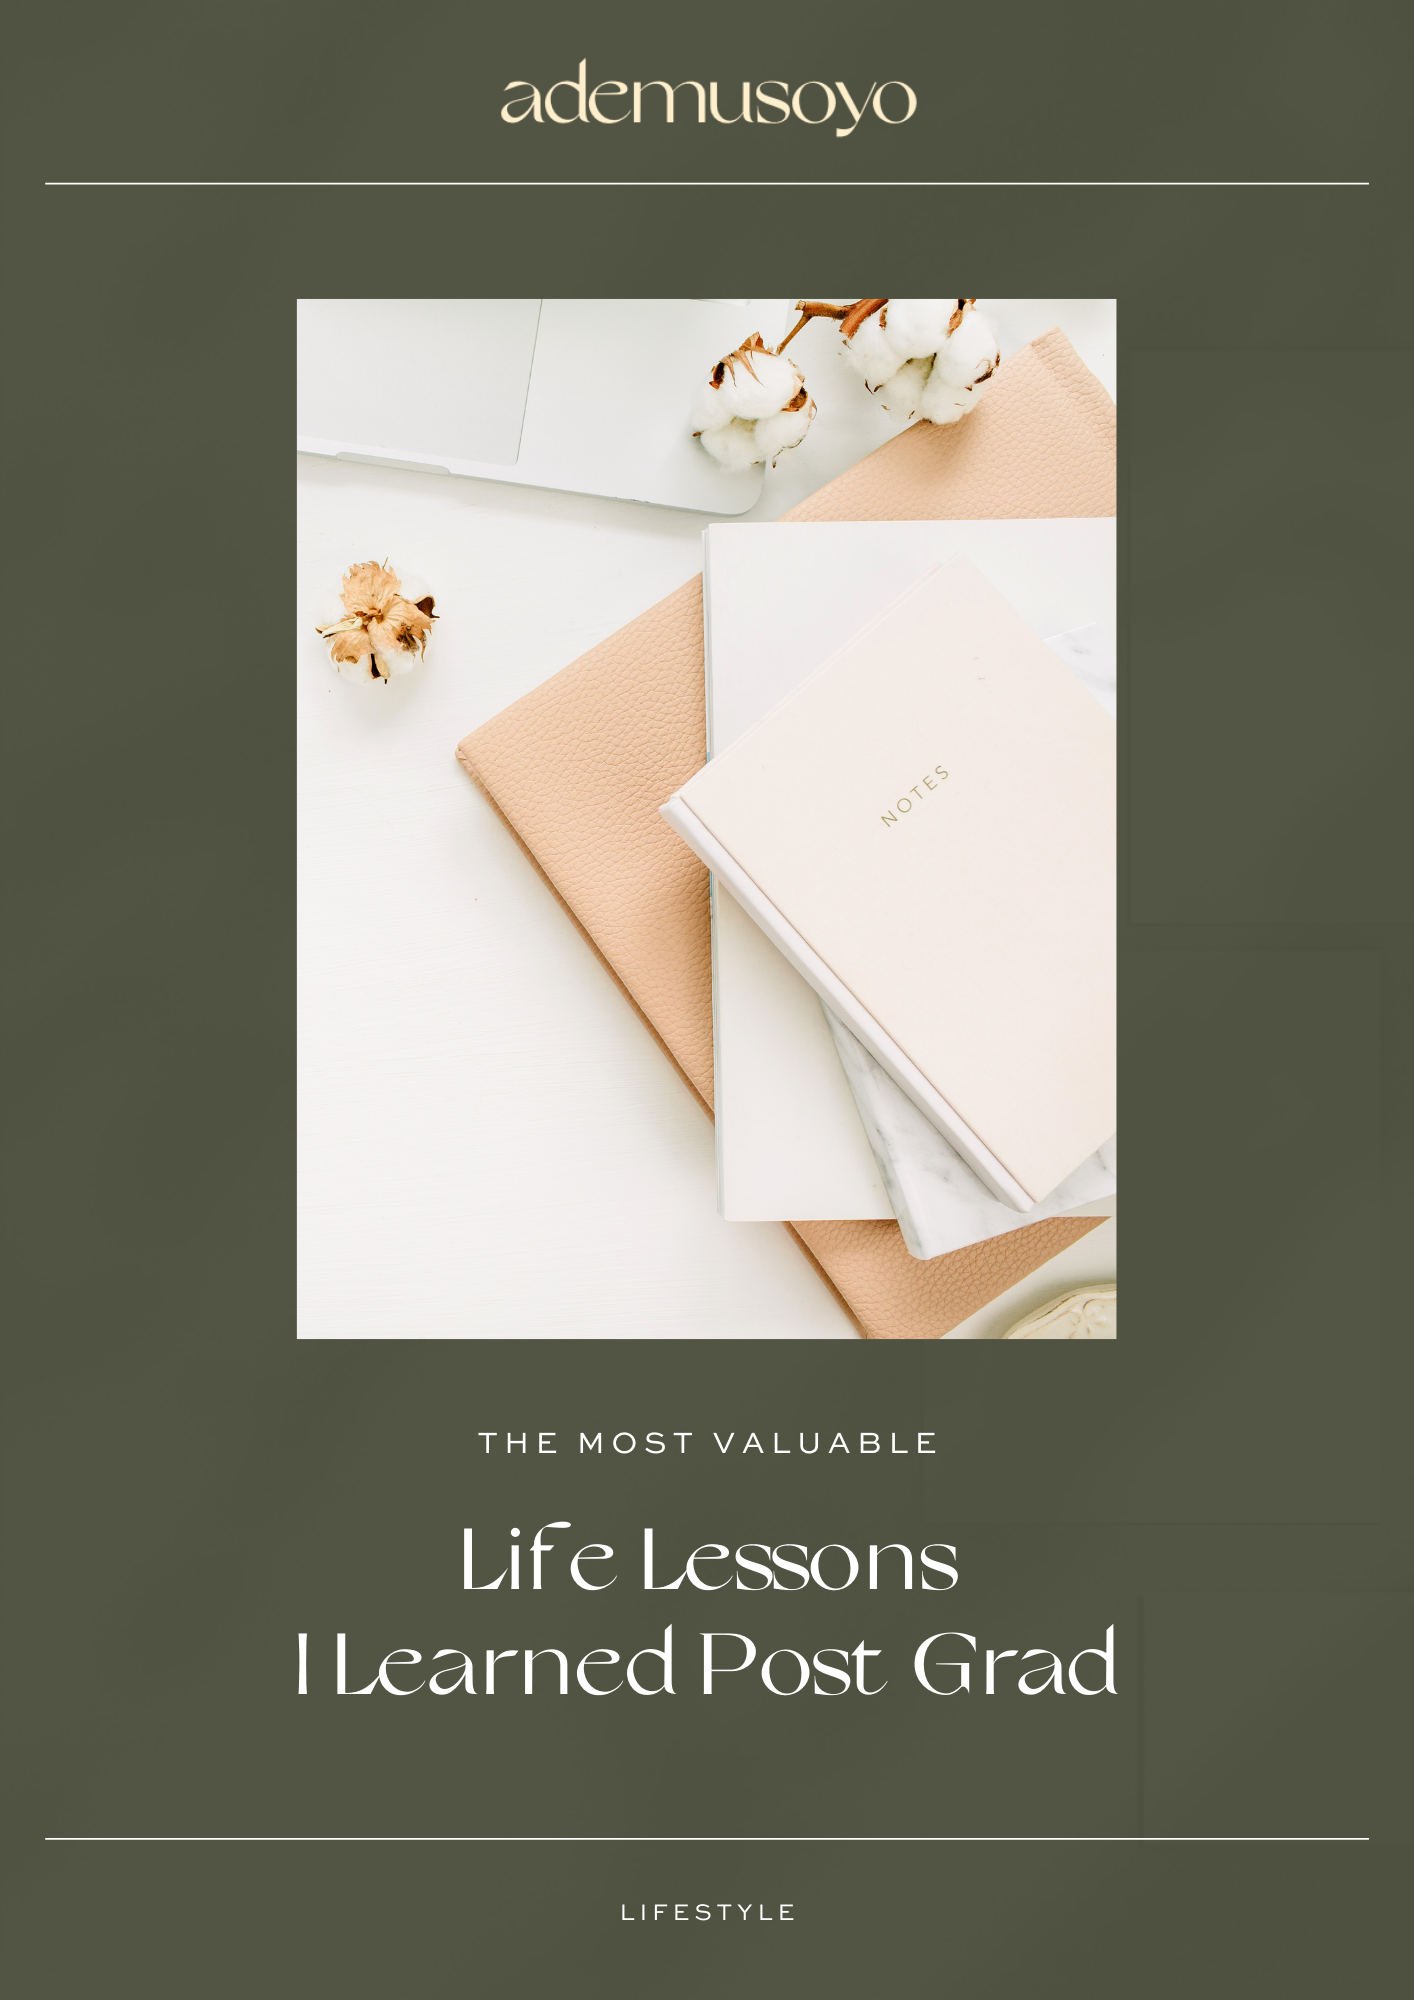 The Most Valuable Life Lessons I Learned Post Grad